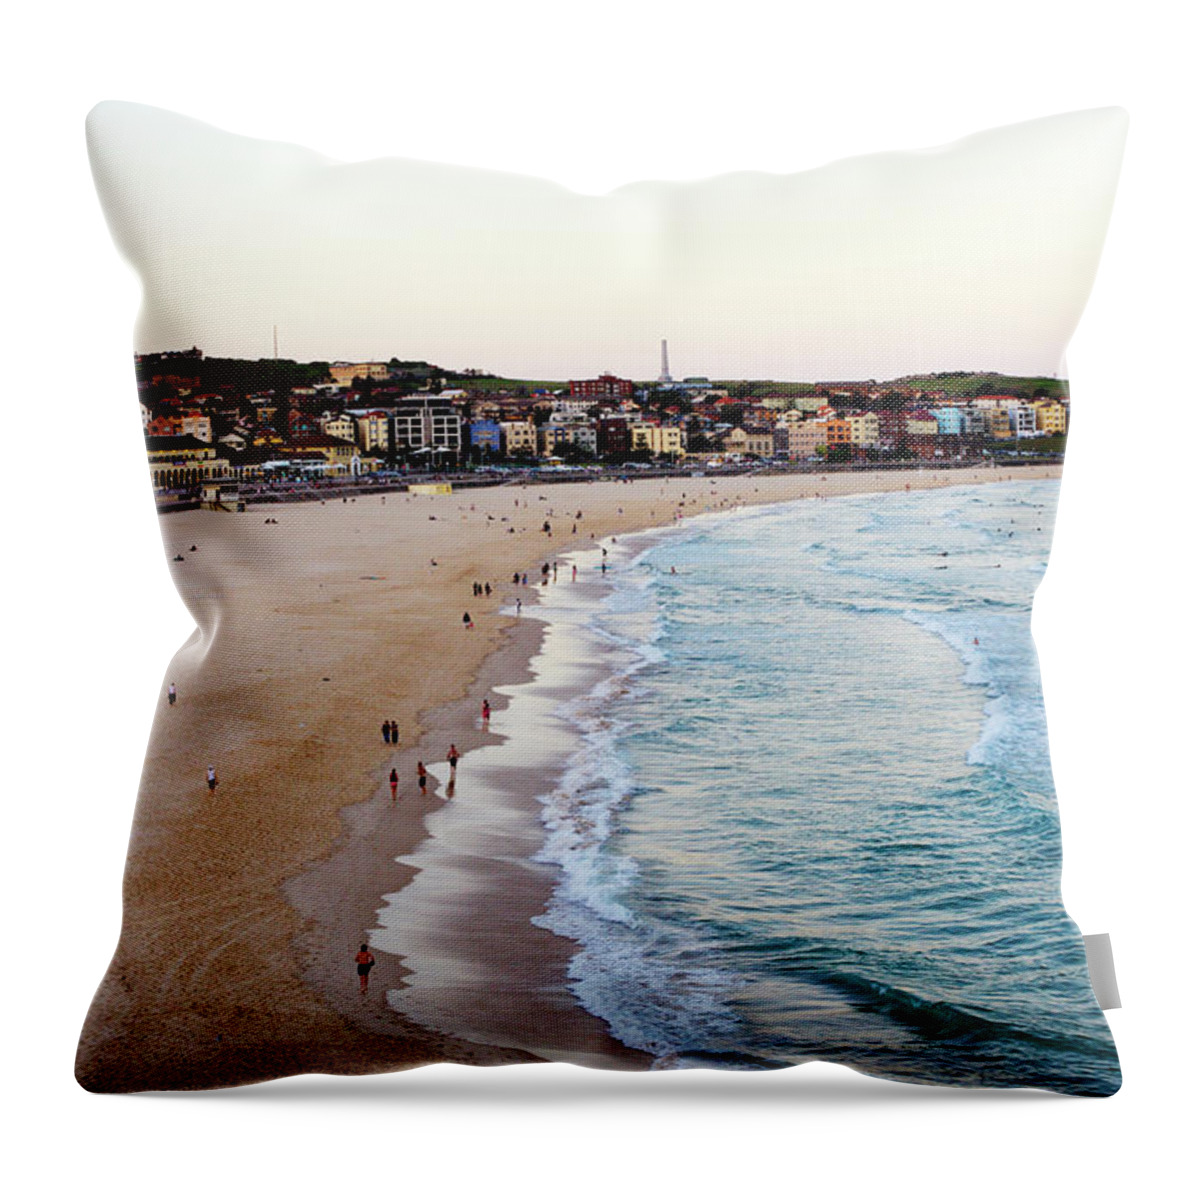 Scenics Throw Pillow featuring the photograph Dusk At Bondi Beach, From South Bondi by Oliver Strewe